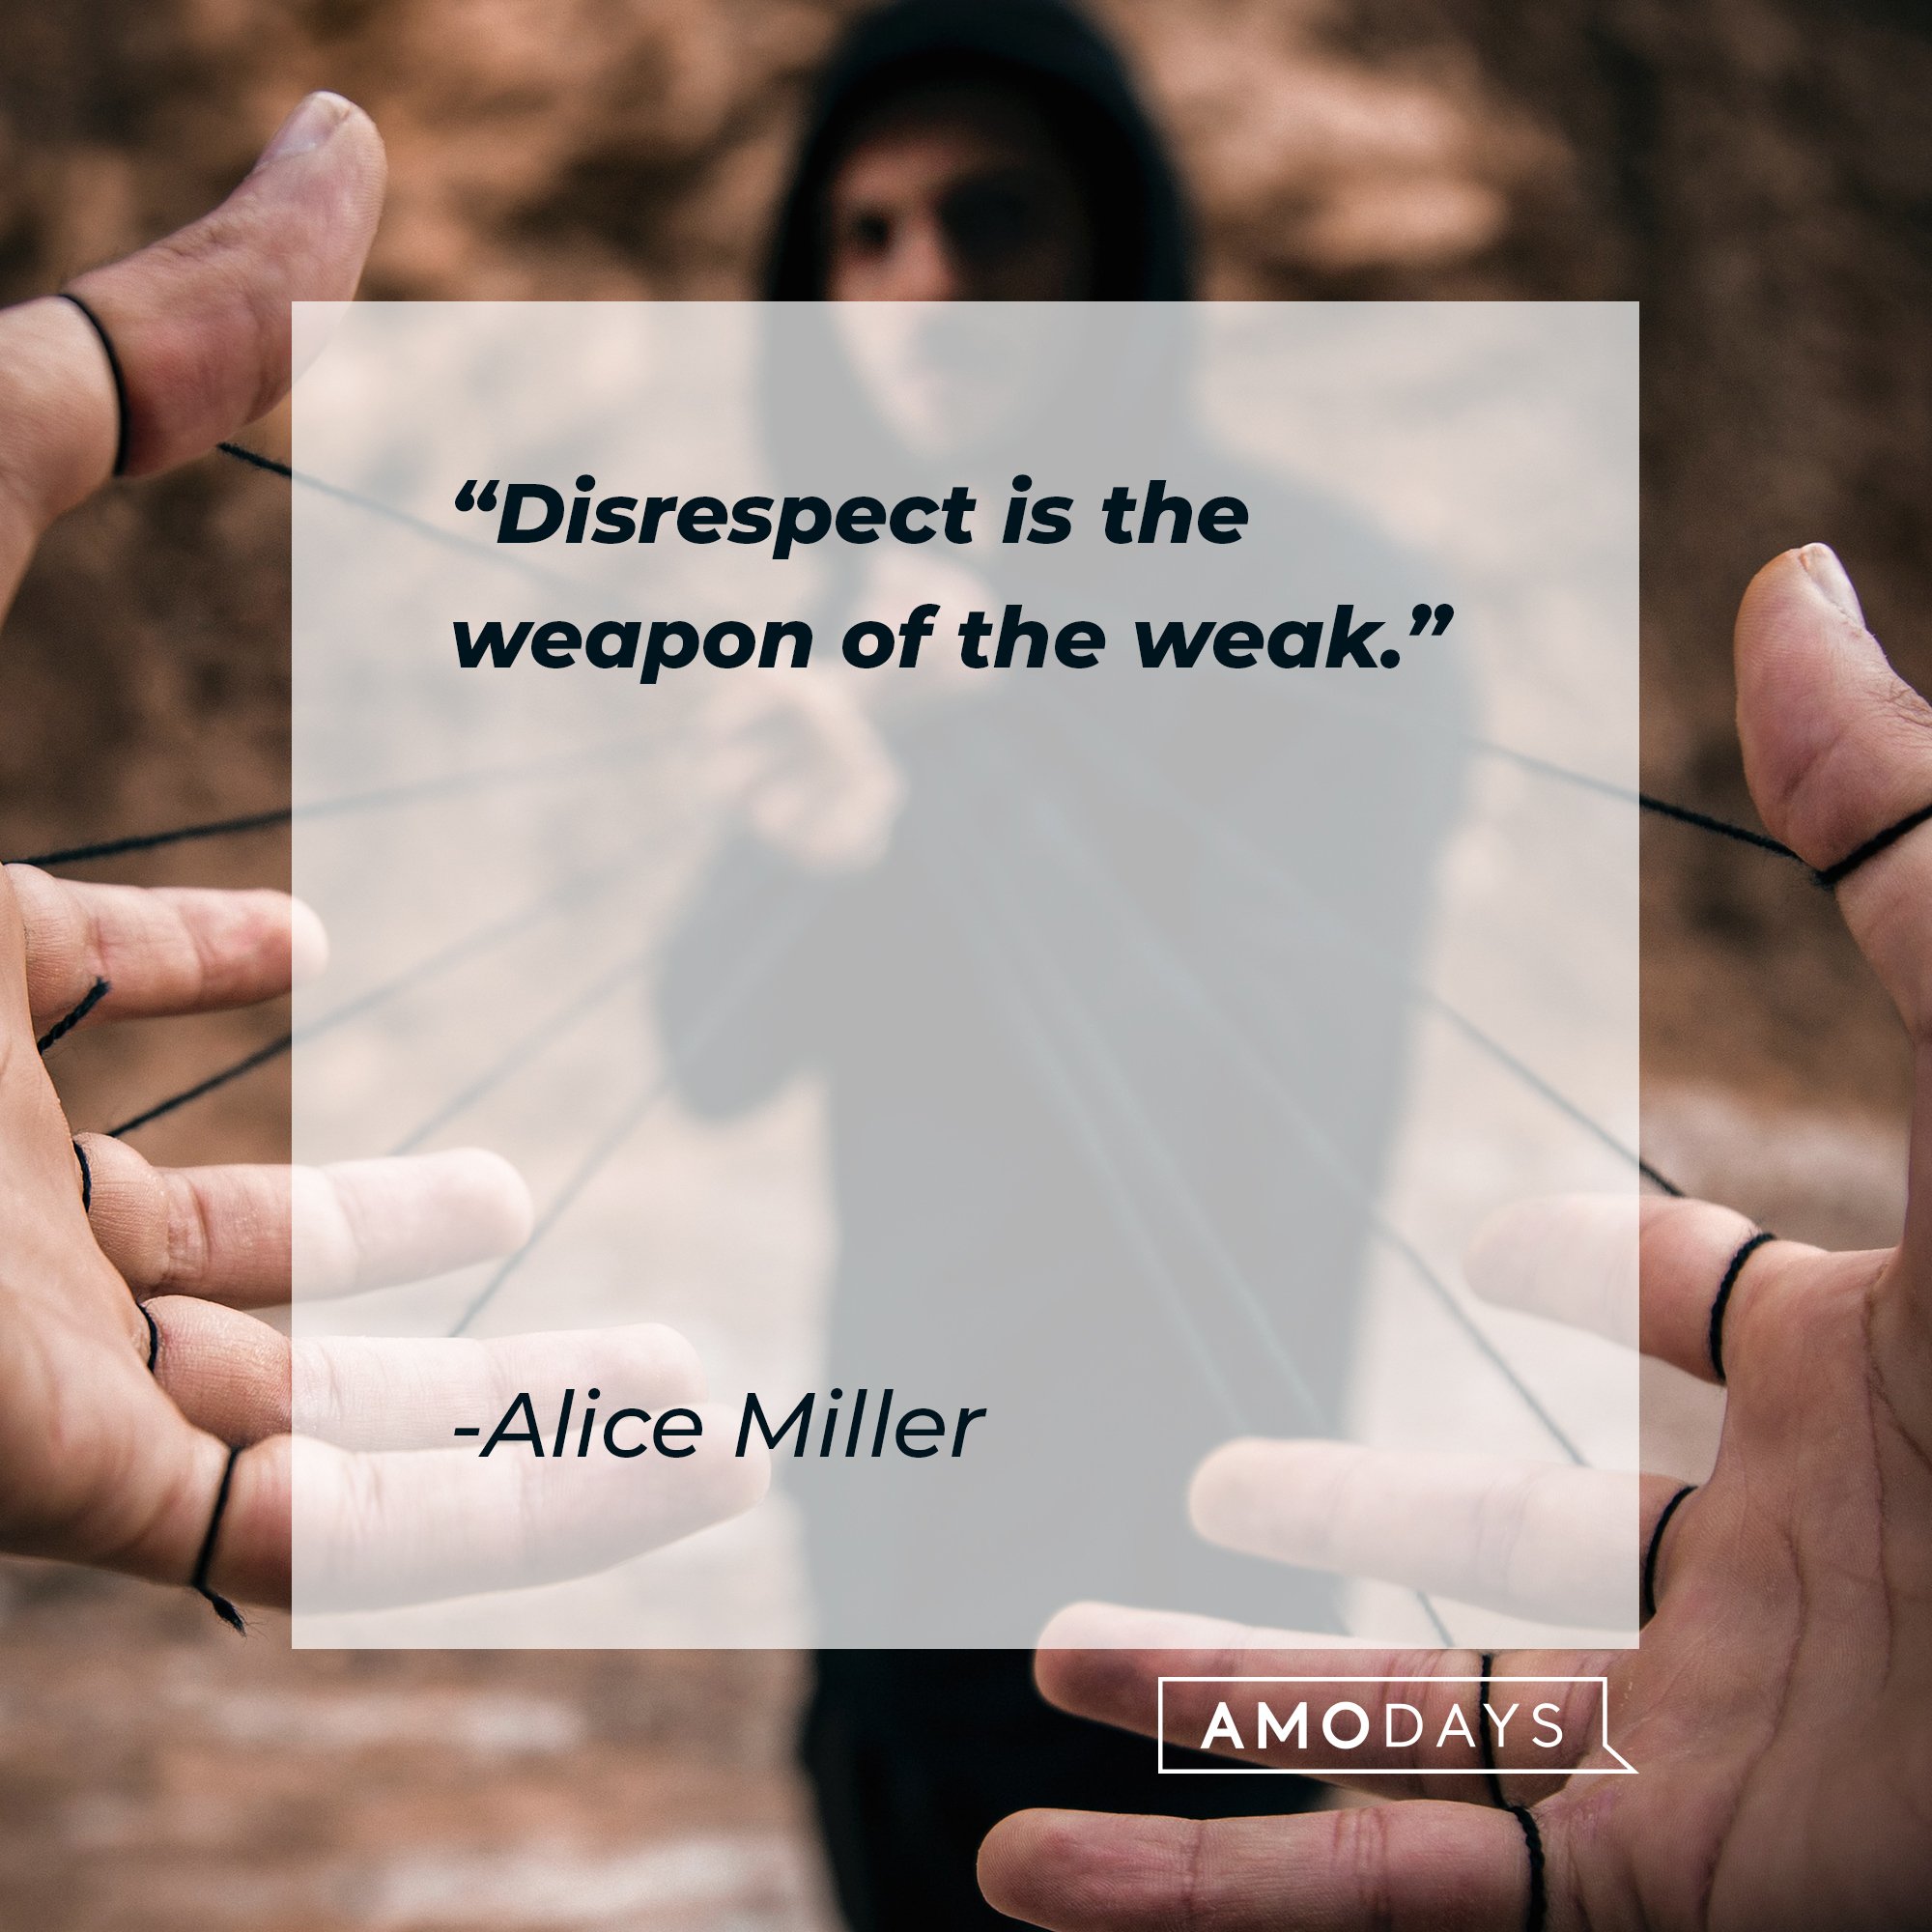 Alice Miller's quote: "Disrespect is the weapon of the weak." | Image: AmoDays